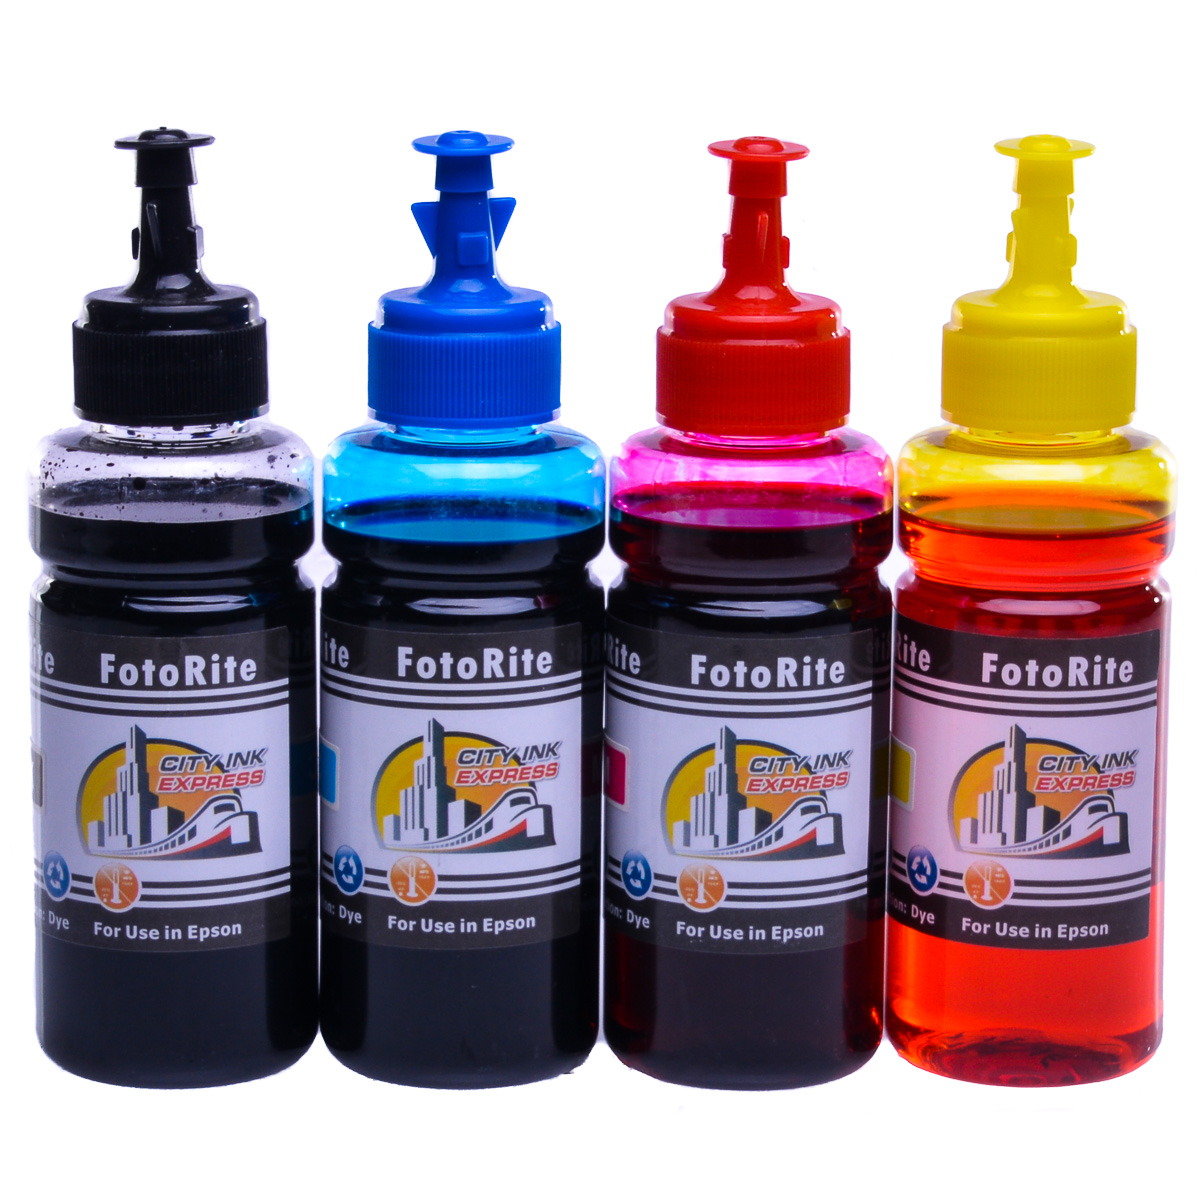 Cheap Multipack dye ink refill replaces Epson ET-4800